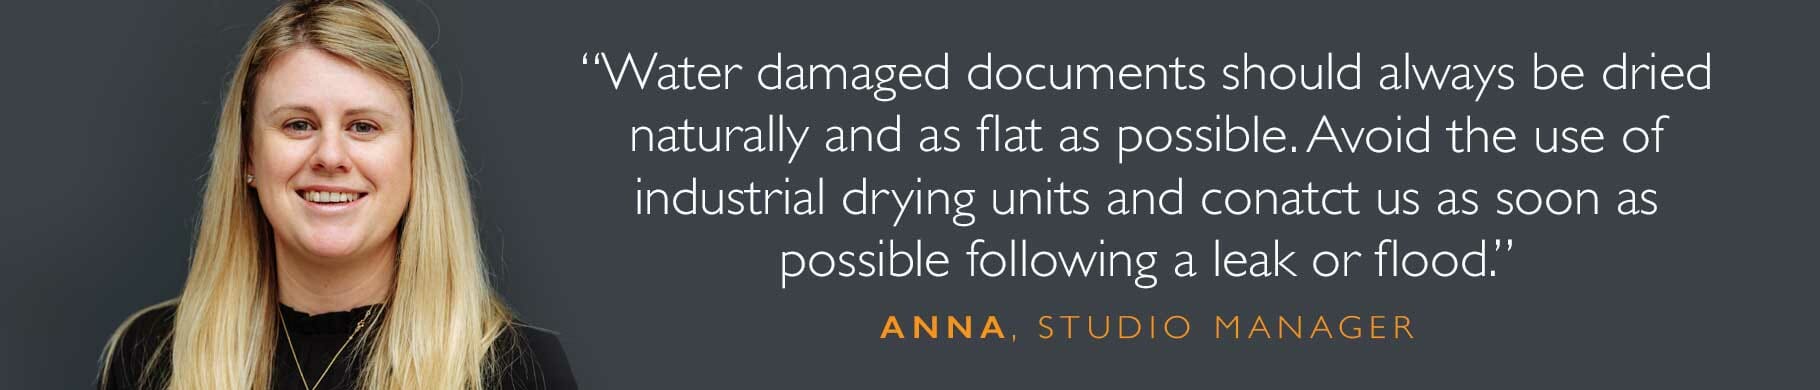 Anna quote about water damaged paper